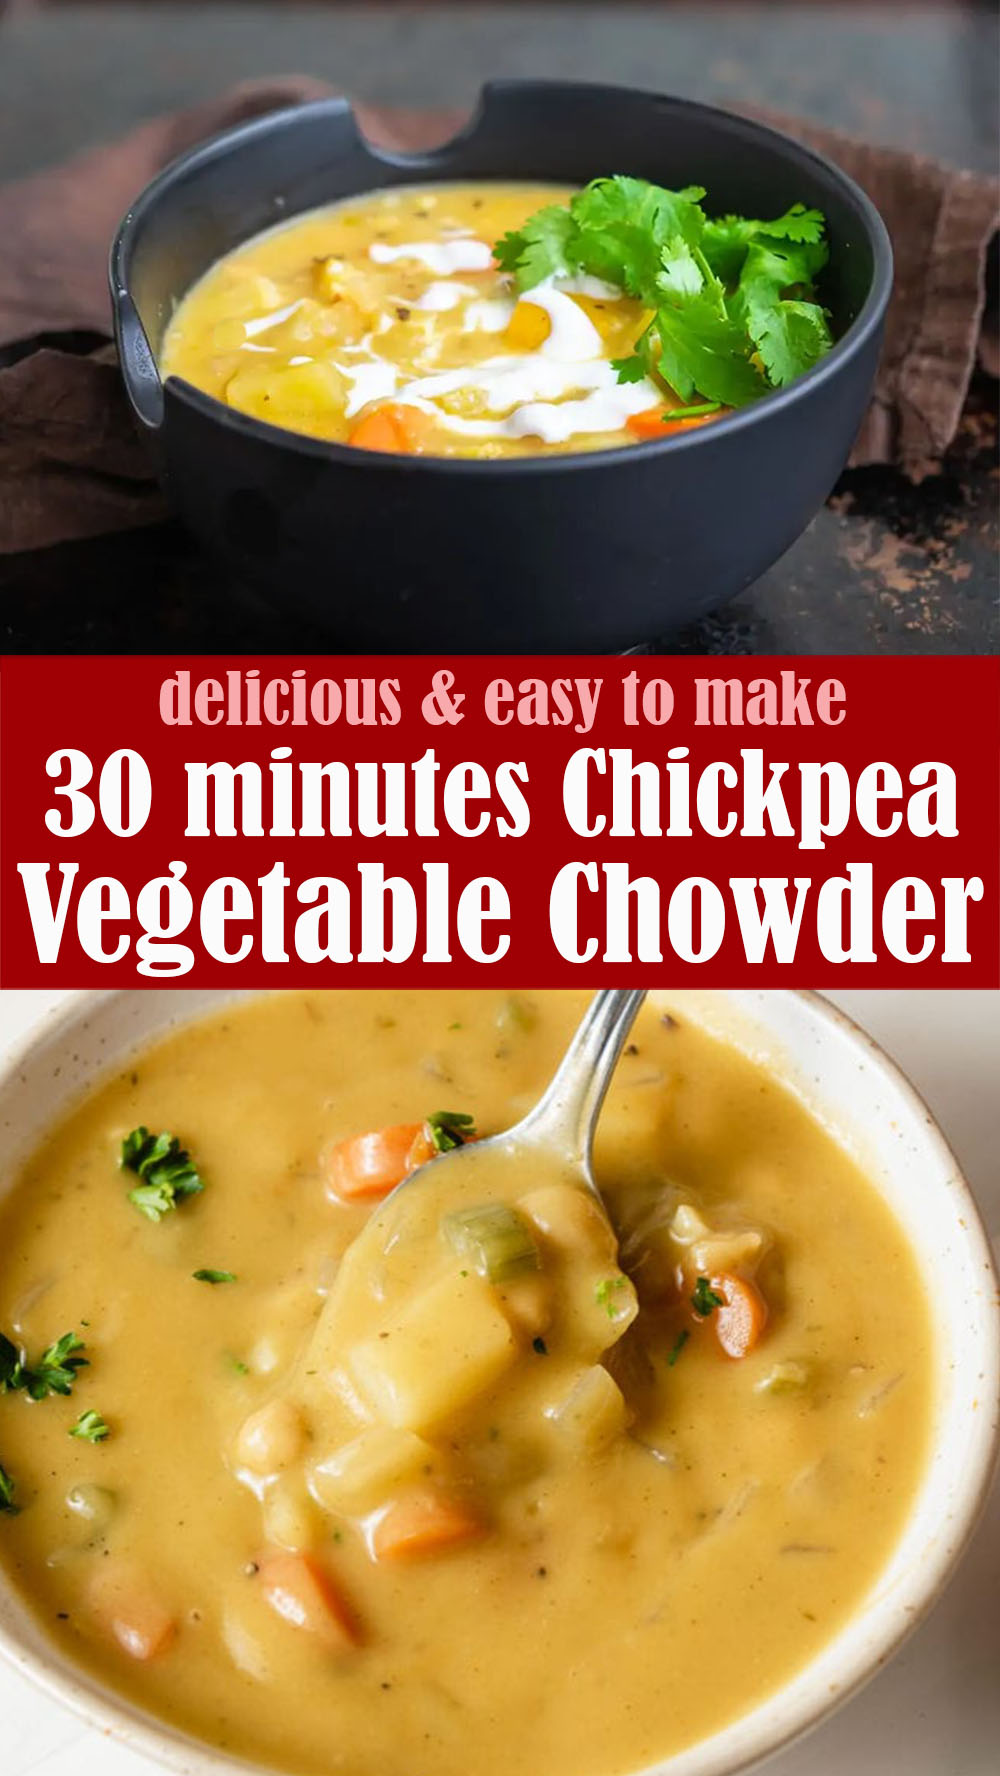 Easy Chickpea Vegetable Chowder